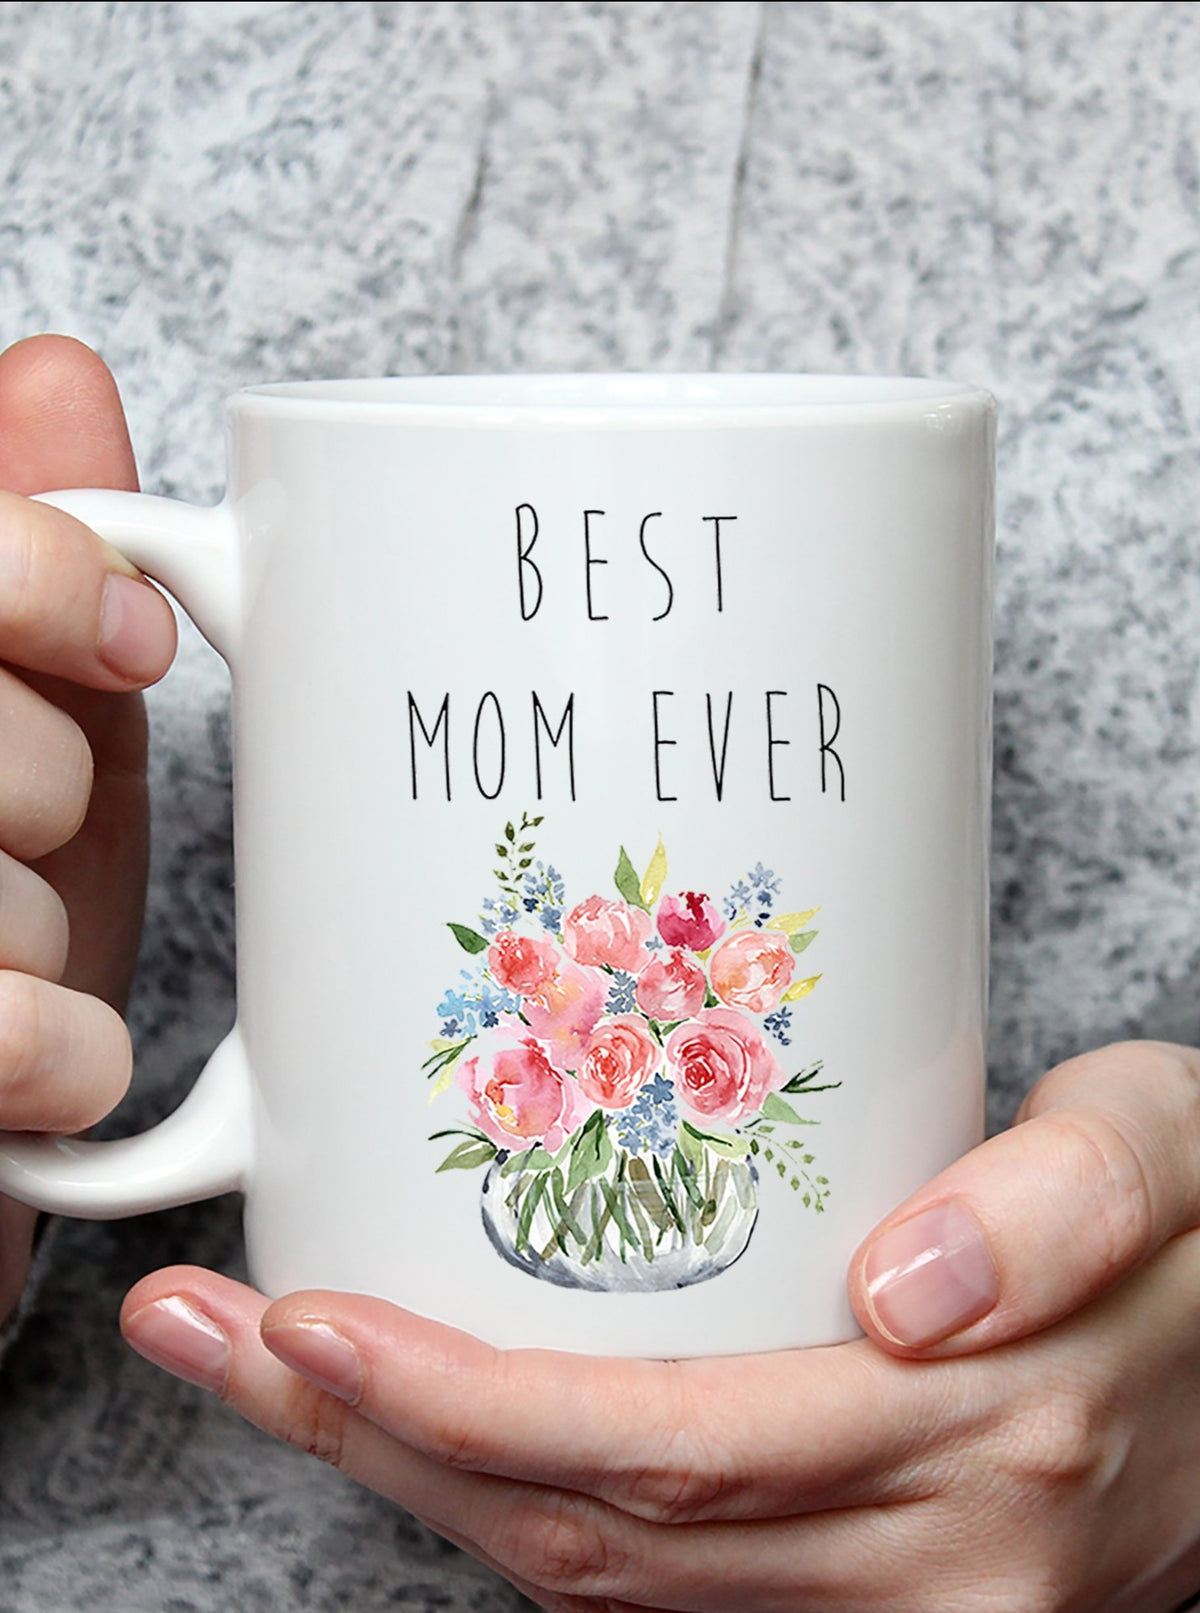 Best Mom Ever Coffee Mug Tea Cup - Mother's Day Gift Idea 11oz / White